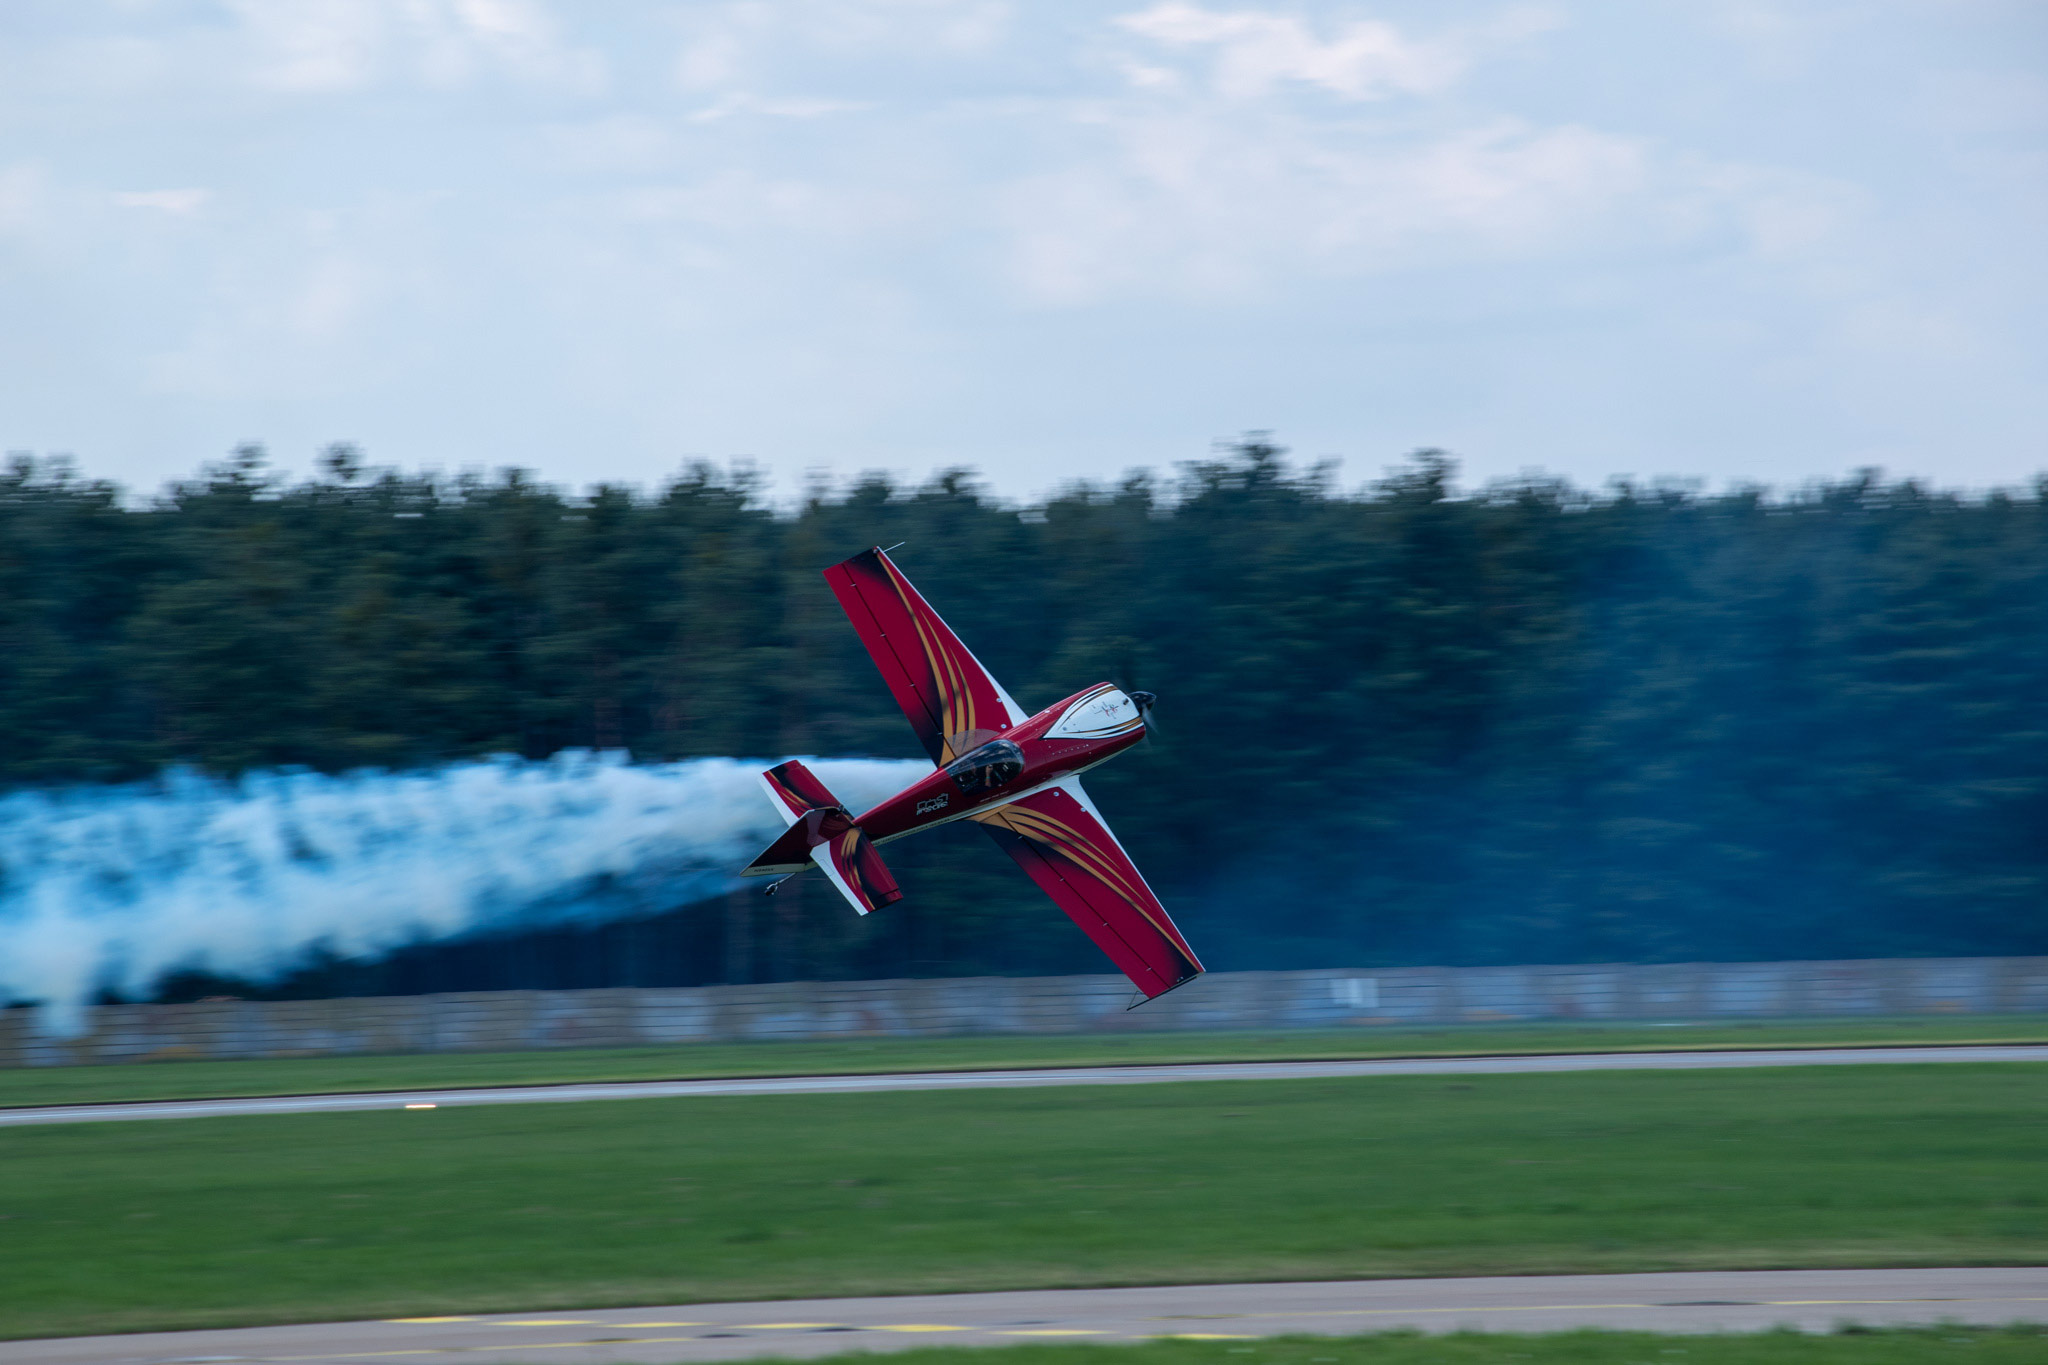 MXS aircraft piloted by acrobat Zoltn Veres from Hungary